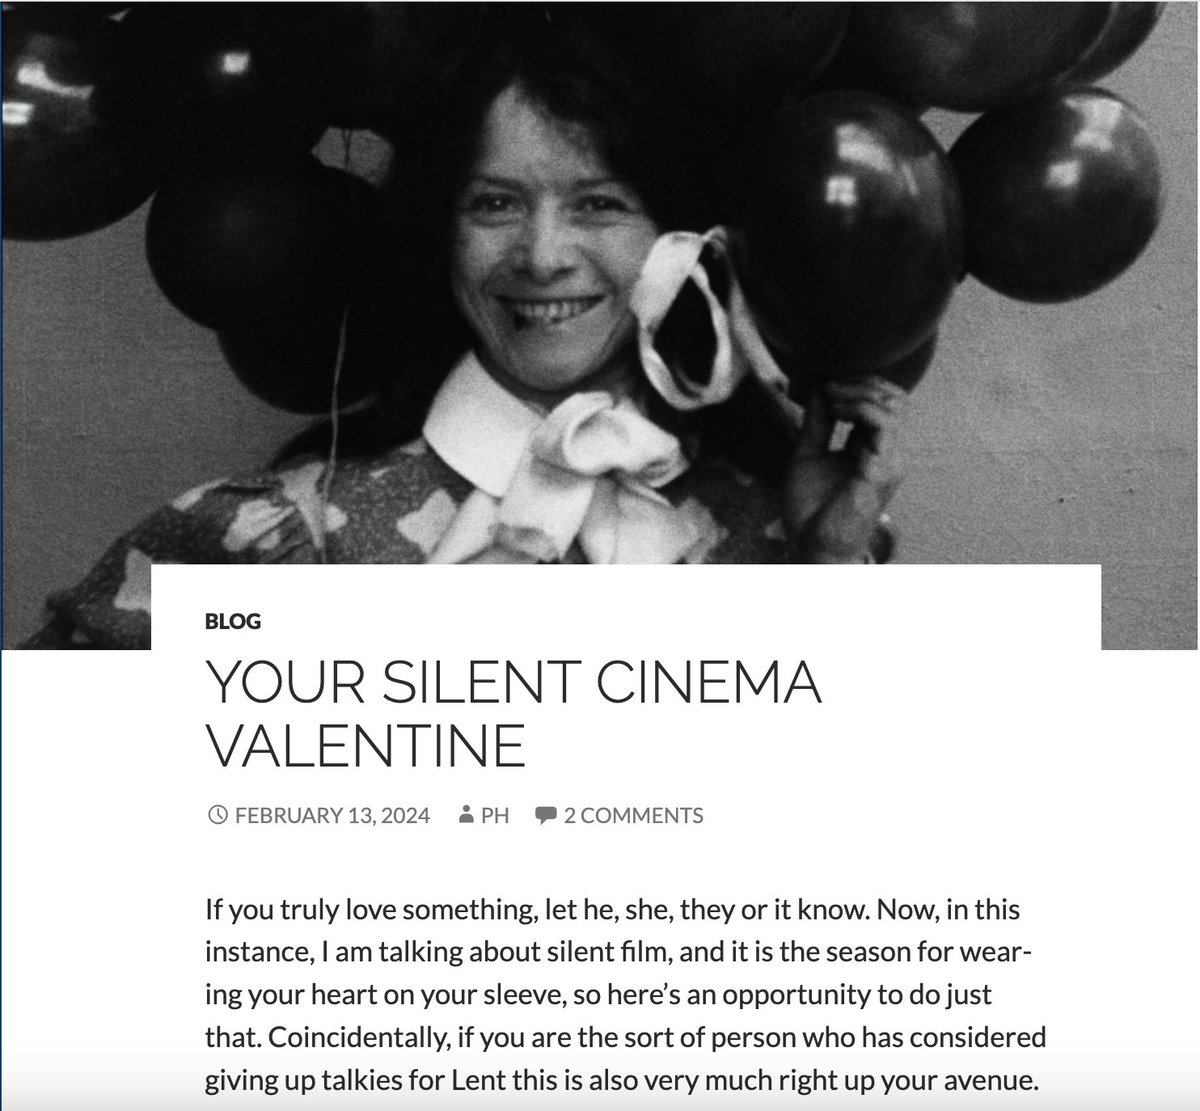 The @NastySilents research team has joined forces with @silentlondon on a new demographic survey about #SilentFilm audiences today! Please take a moment for Léontine (she'd do it for you). ❤️🎞️🙏 silentlondon.co.uk/2024/02/13/you…